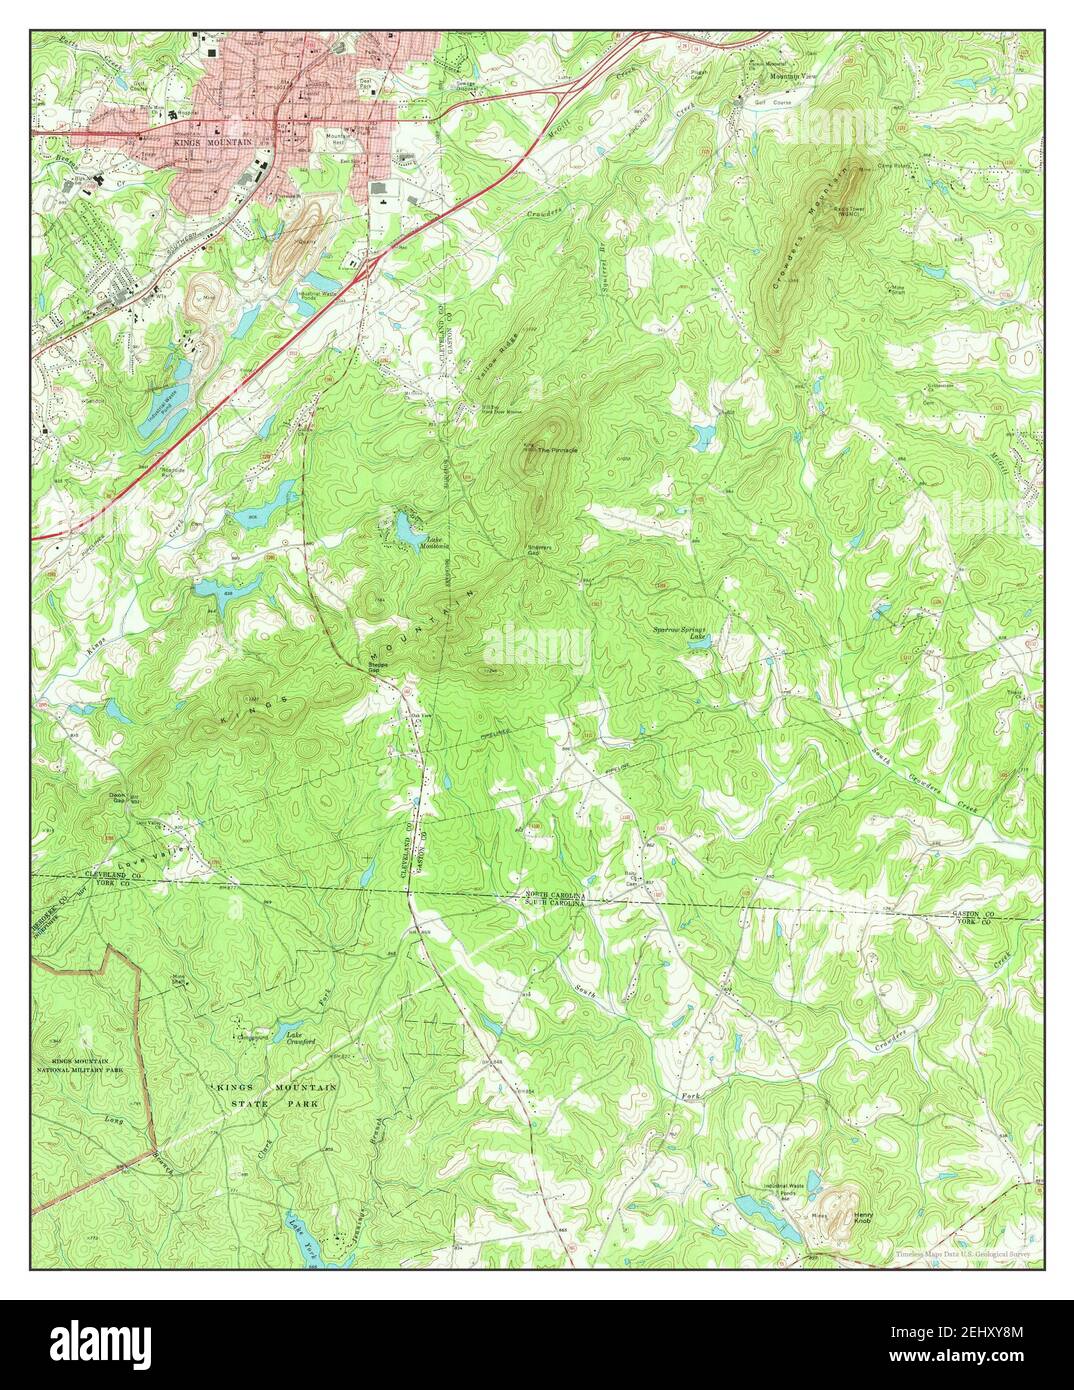 Kings Mountain, North Carolina, map 1971, 1:24000, United States of America by Timeless Maps, data U.S. Geological Survey Stock Photo